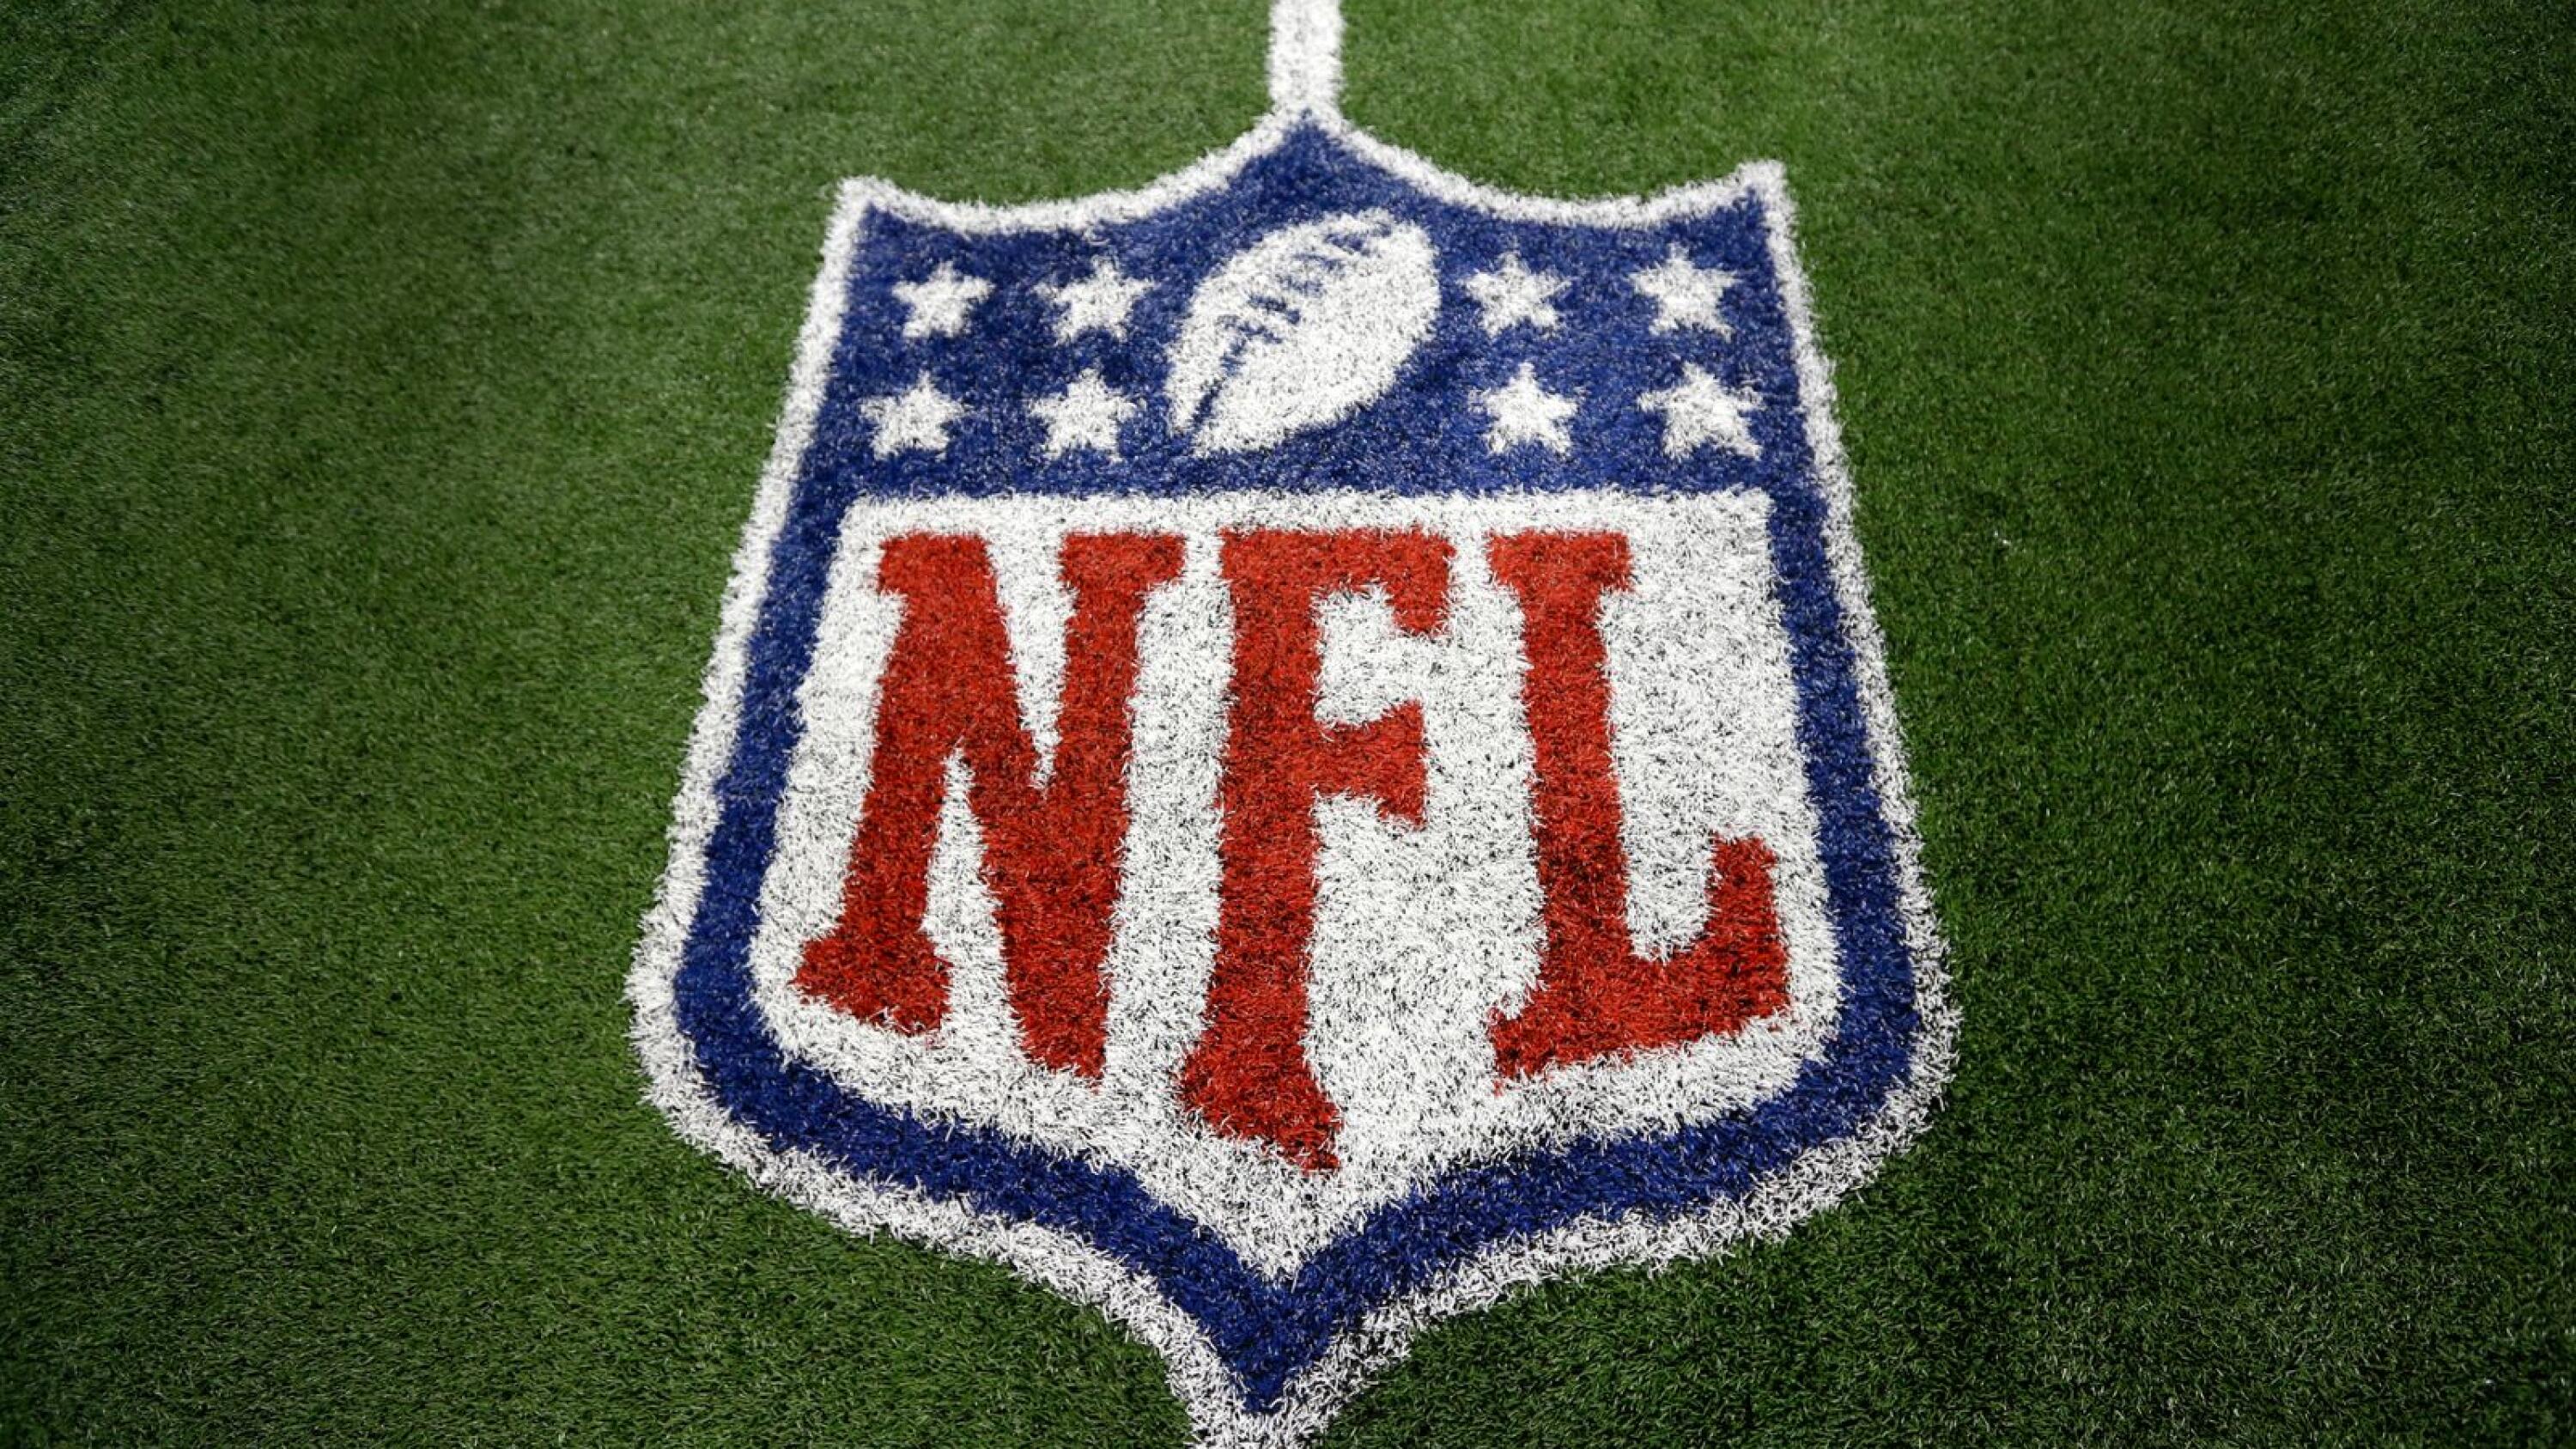 NFL Network, NFL RedZone will be offered direct-to-consumer on NFL+